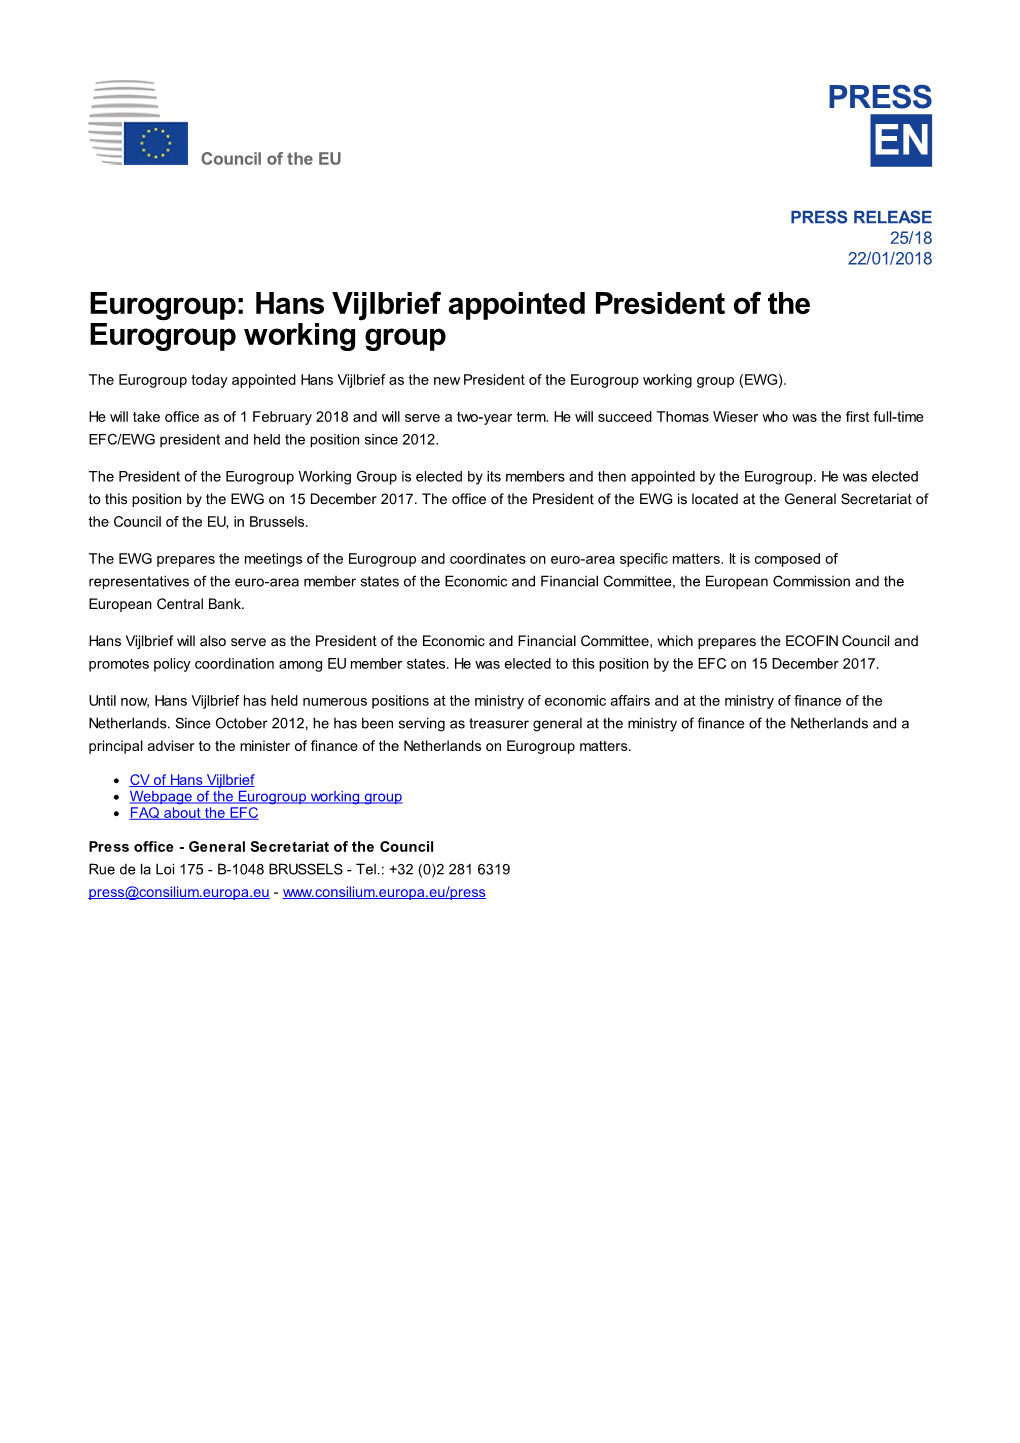 Eurogroup: Hans Vijlbrief Appointed President of the Eurogroup Working Group